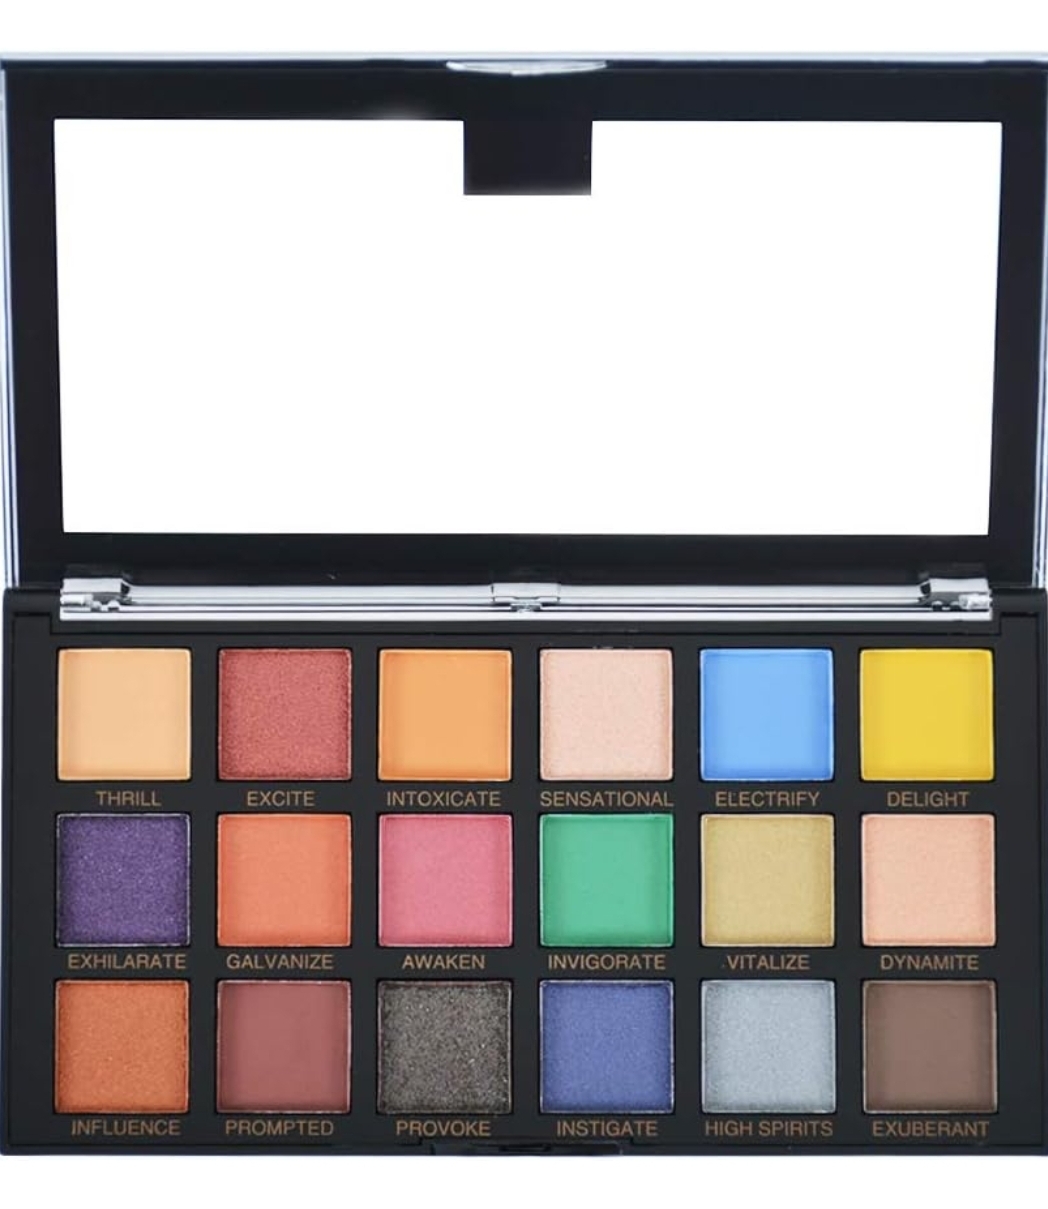 OBLHER B, Two 18 Colour Eyeshadow Palettes (36 Colours in Total).